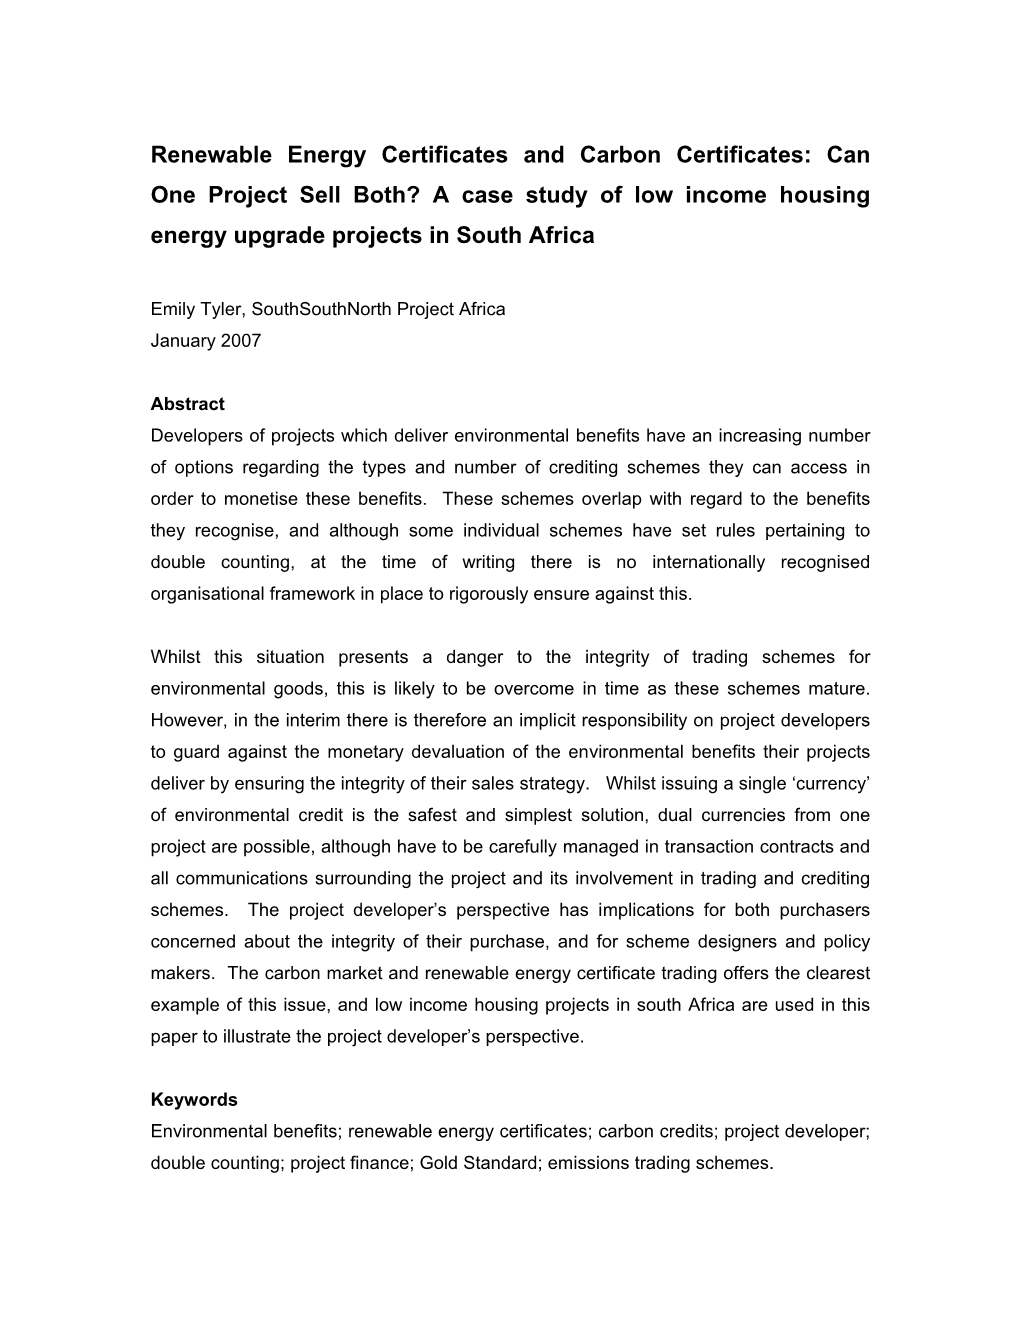 Renewable Energy Certificates and Carbon Certificates: Can One Project Sell Both? a Case Study of Low Income Housing Energy Upgrade Projects in South Africa